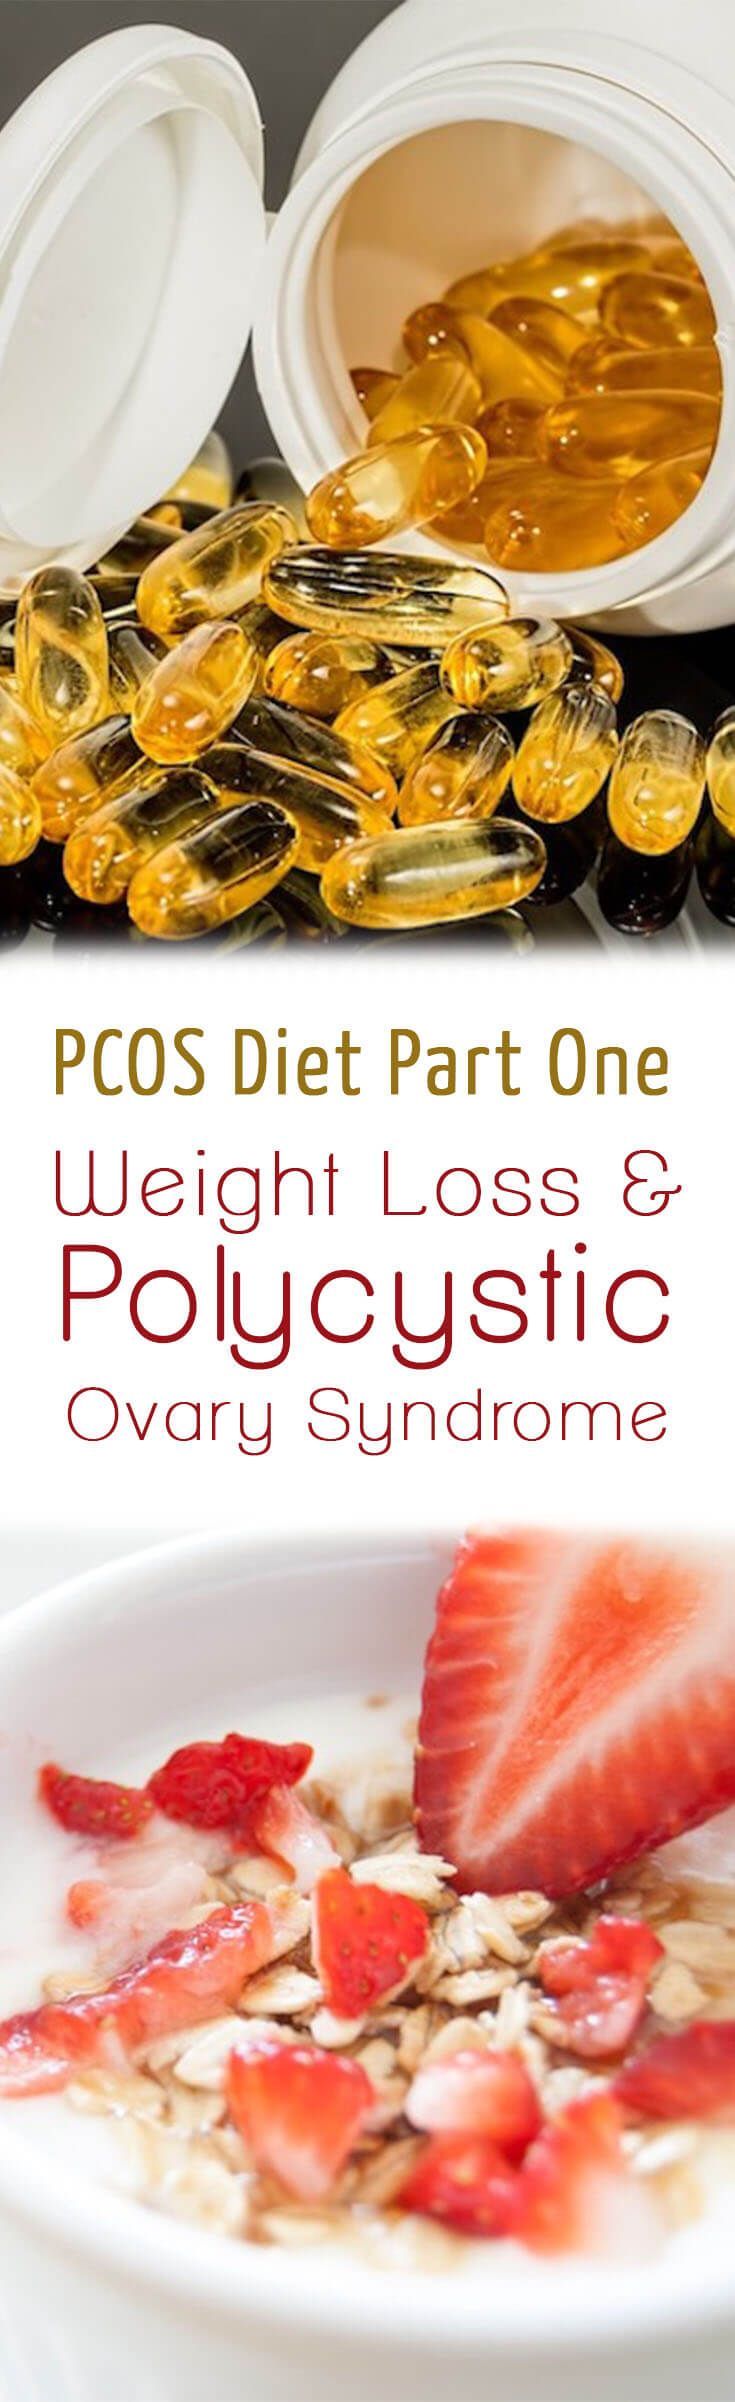 I discuss the research on the PCOS diet and what to eat if you want to better manage your polycystic ovary syndrome symptoms.